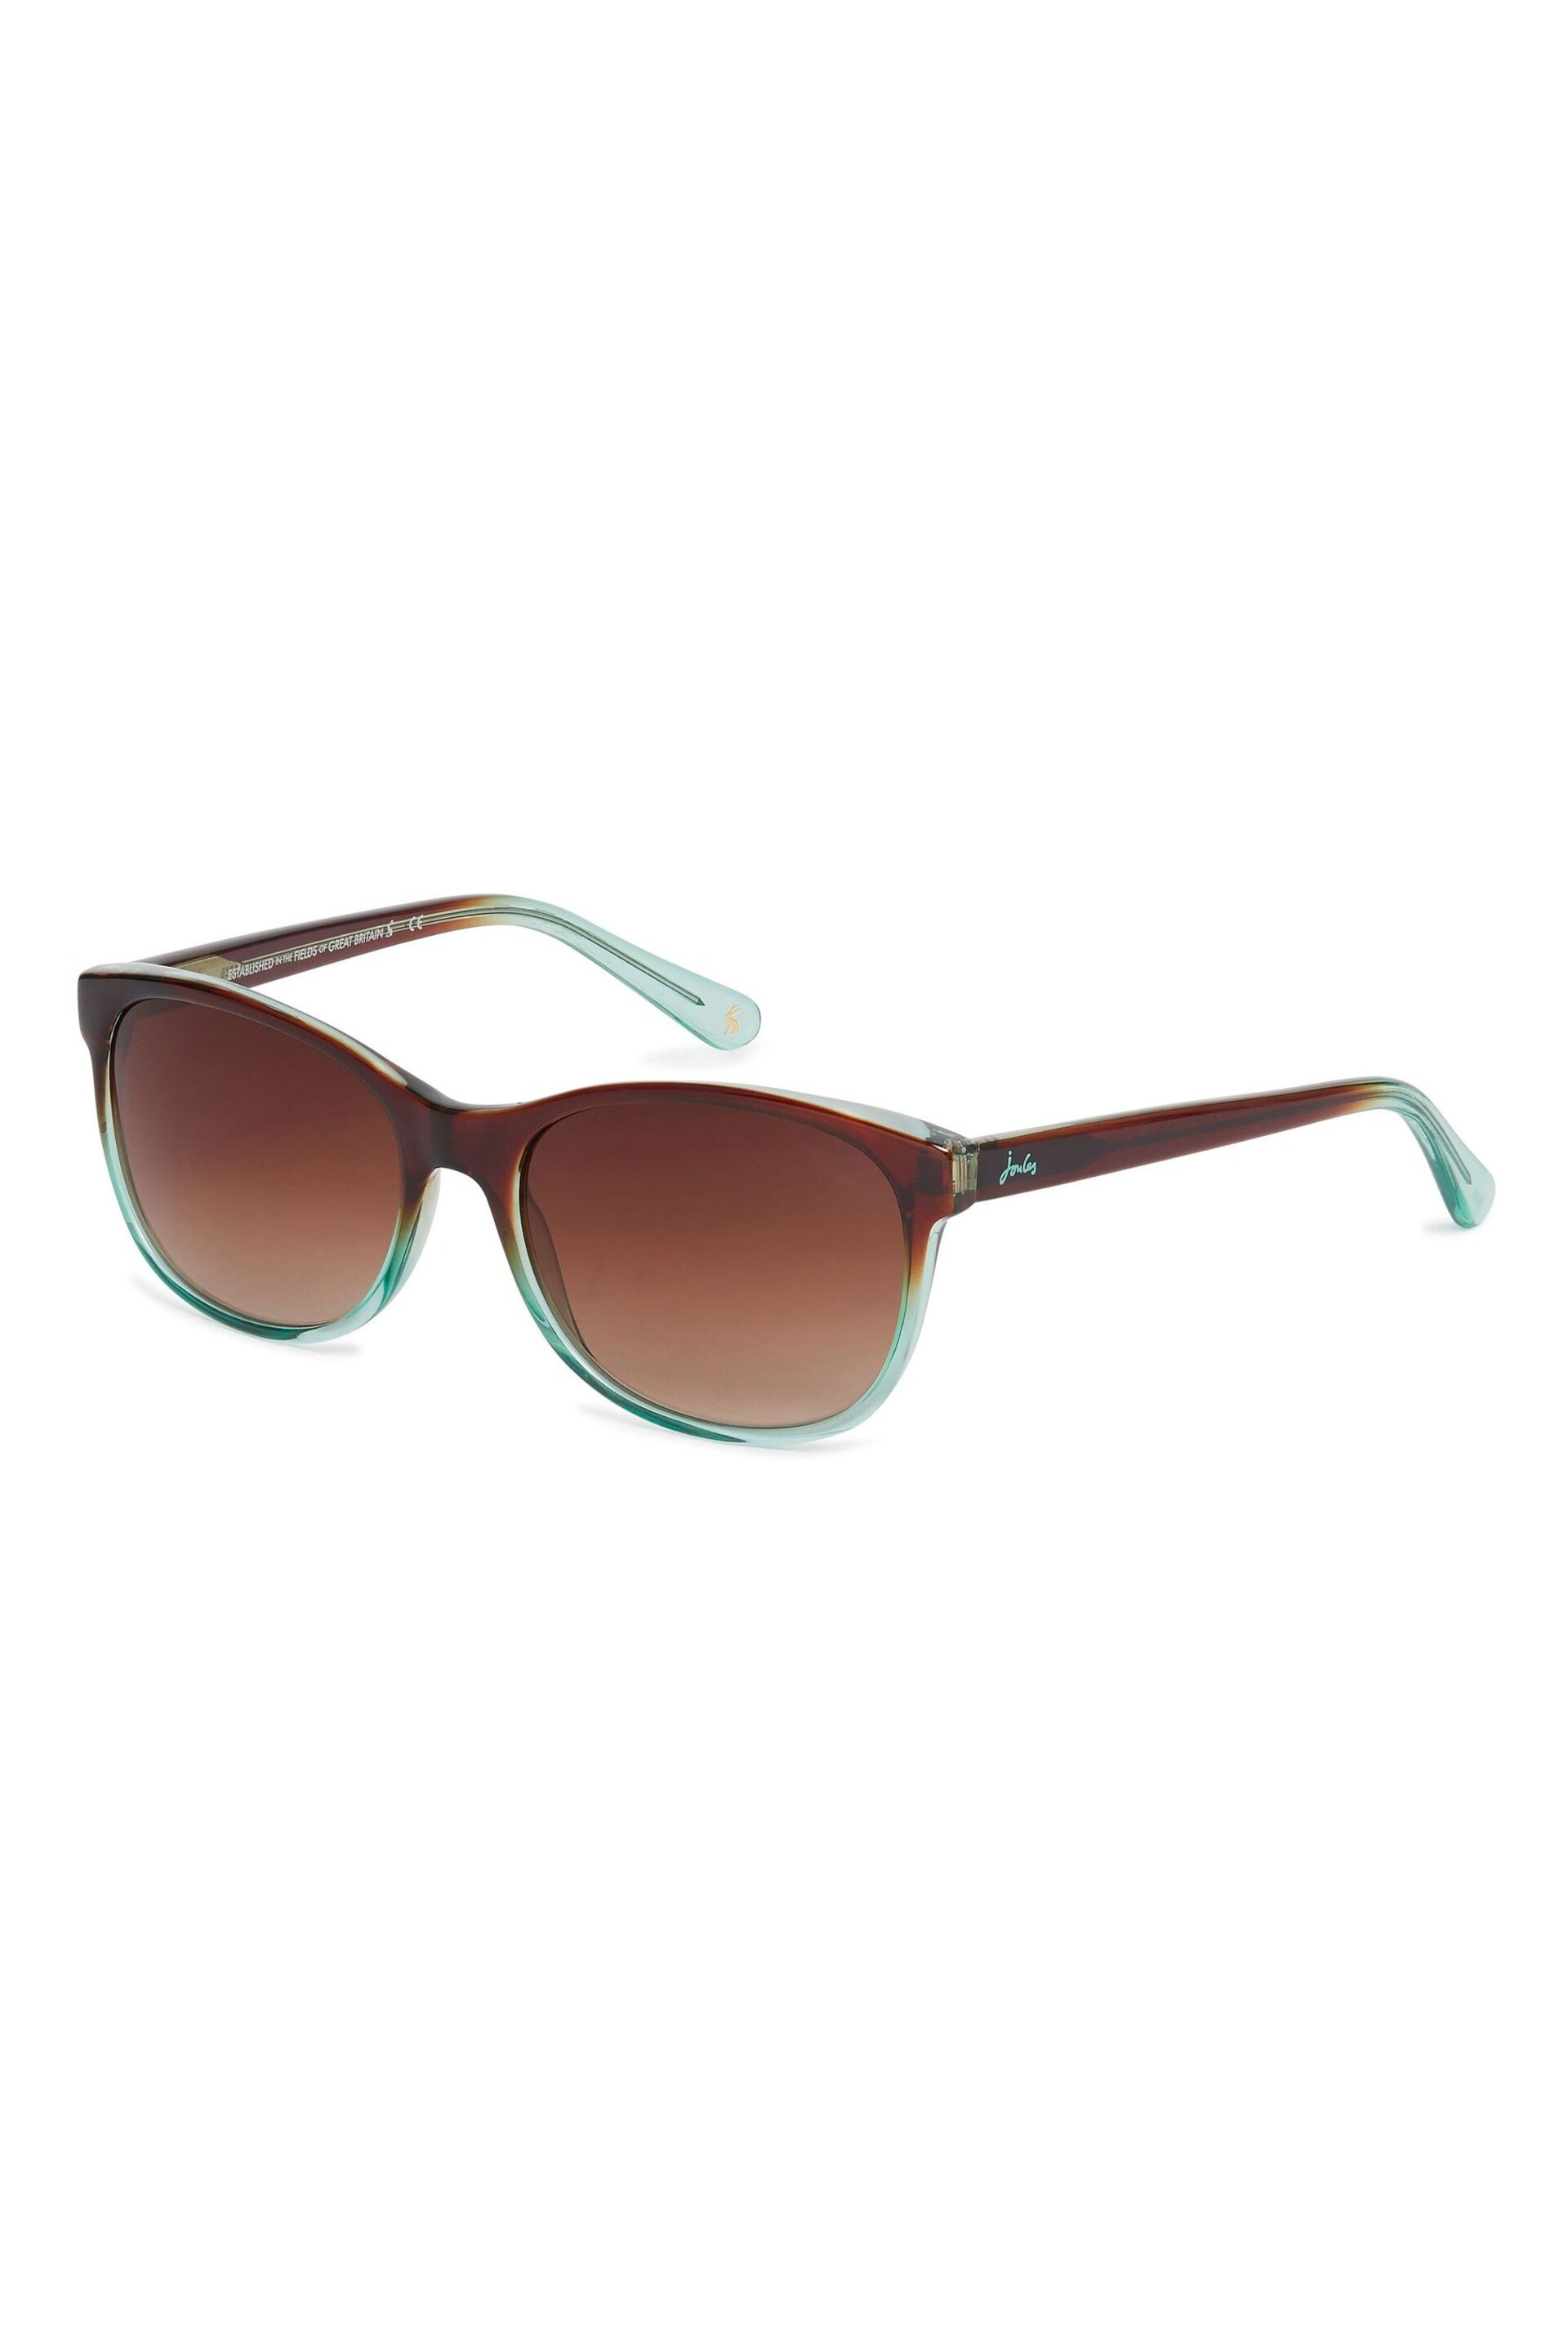 Joules Brown/Teal Blue Small Classic Graduated Bi-Colour Sunglasses - Image 1 of 3